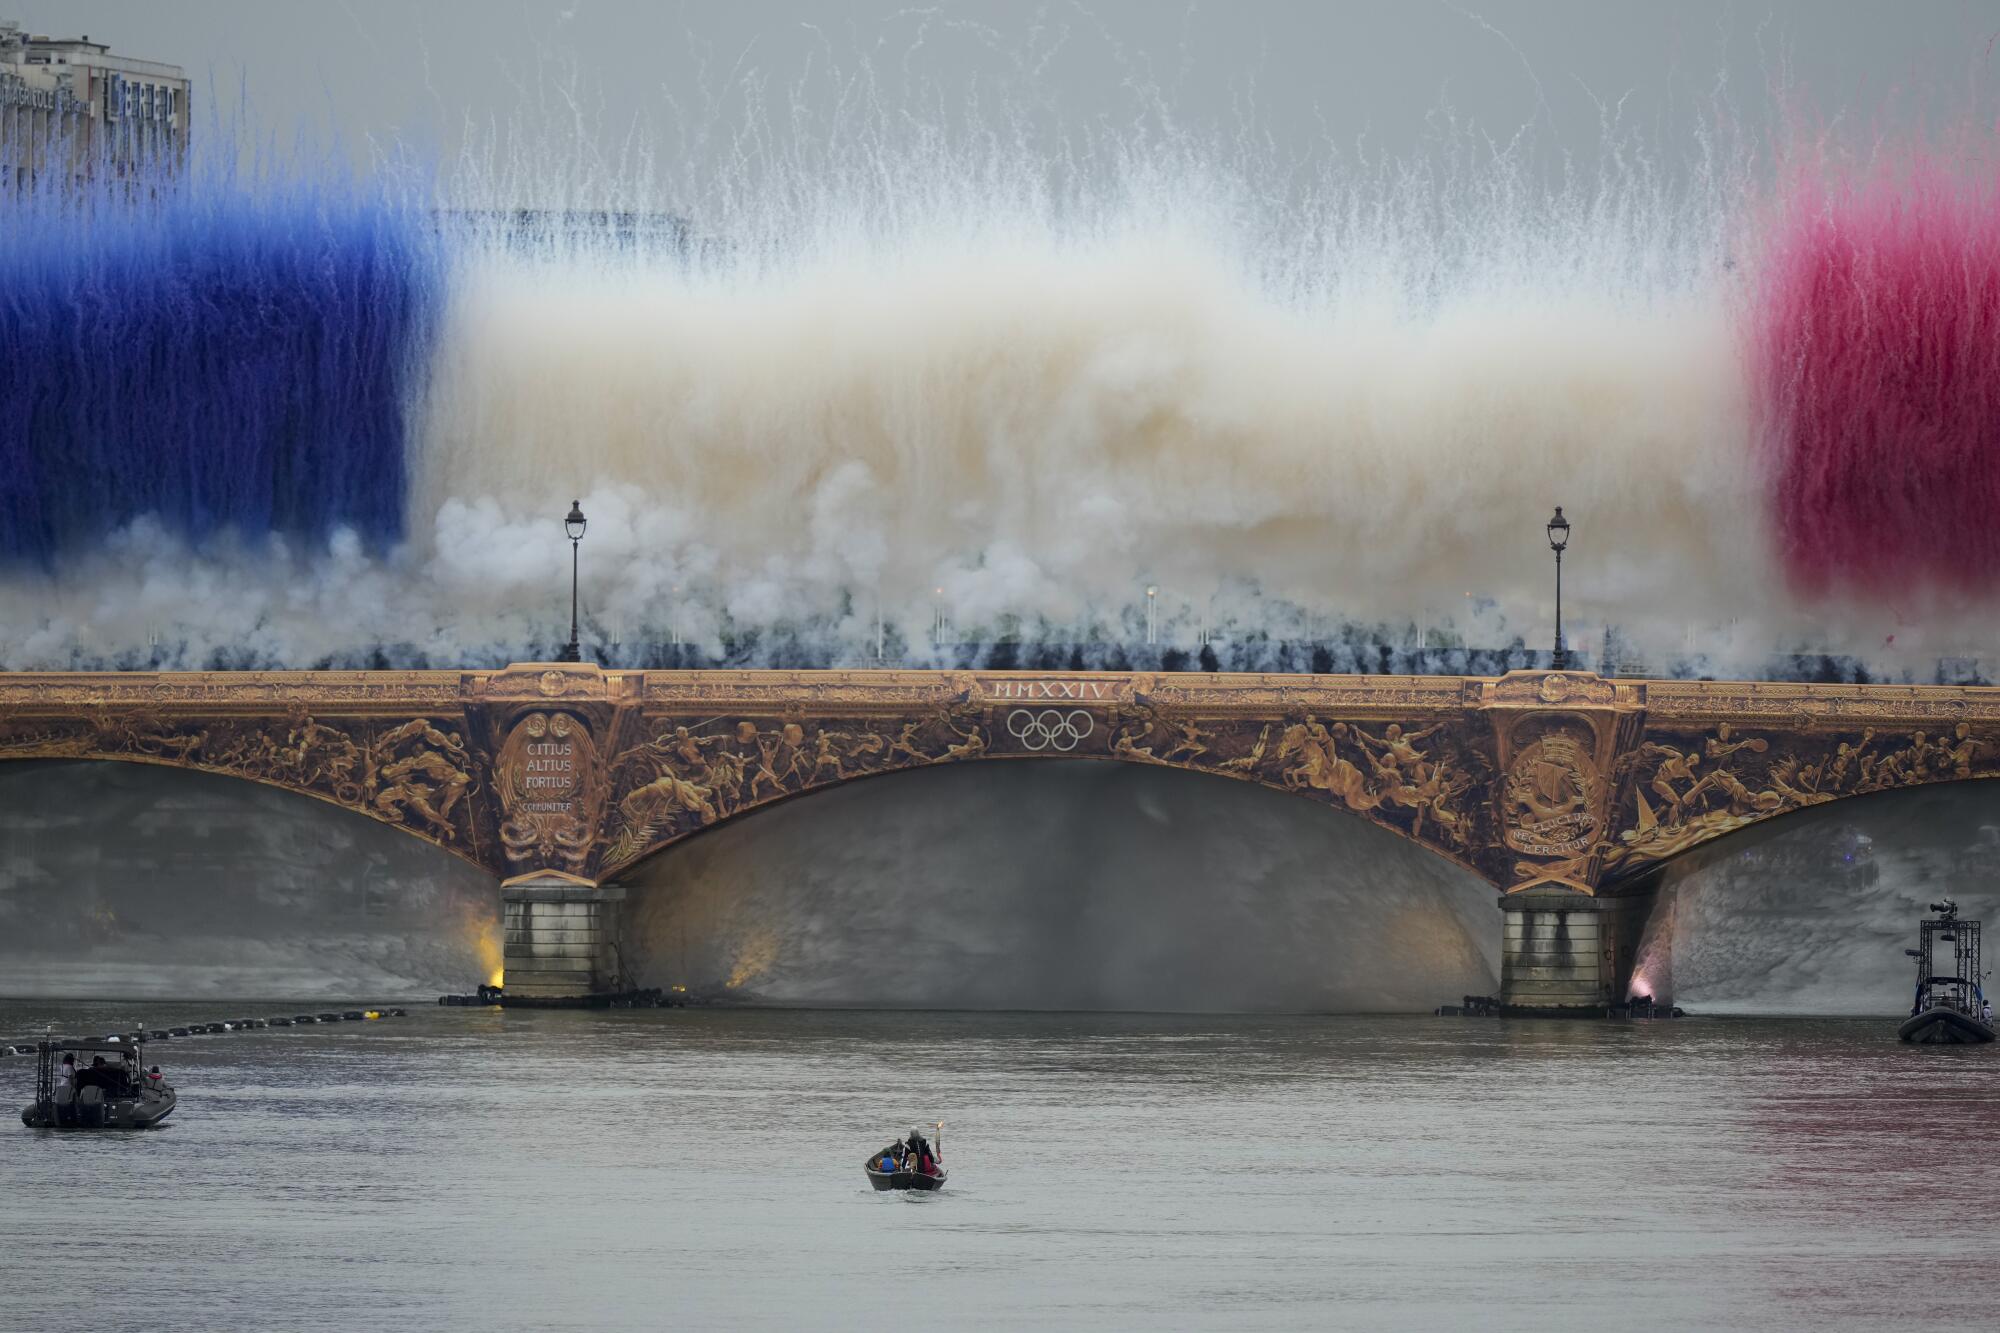 The Olympic torch travels by boat as ceremonial smoke in the colors of the France flag appear over the Seine River Paris.